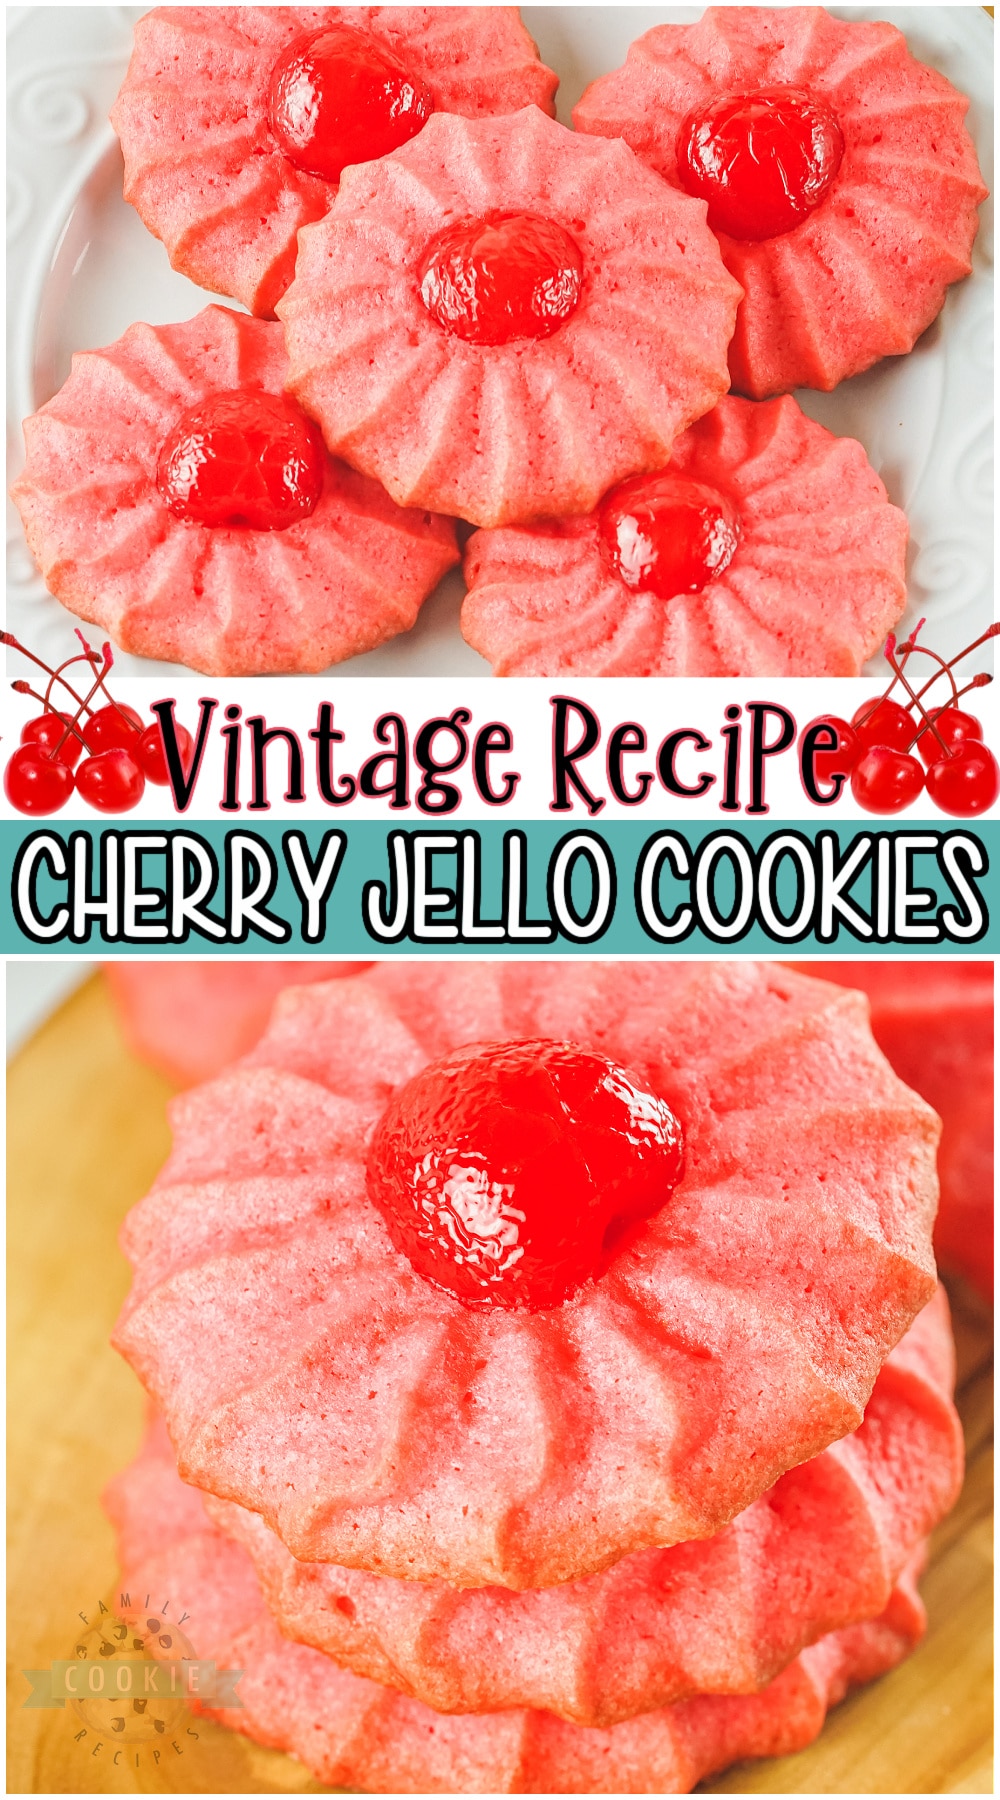 Vintage Cherry Jello cookies are a buttery, delicious cookie with lovely cherry flavor! Classic jello cookie recipe with maraschino cherries perfect for the holidays, or any occasion! #cookies #cherry #jello #vintage #baking #holidays #easyrecipe from FAMILY COOKIE RECIPES via @buttergirls